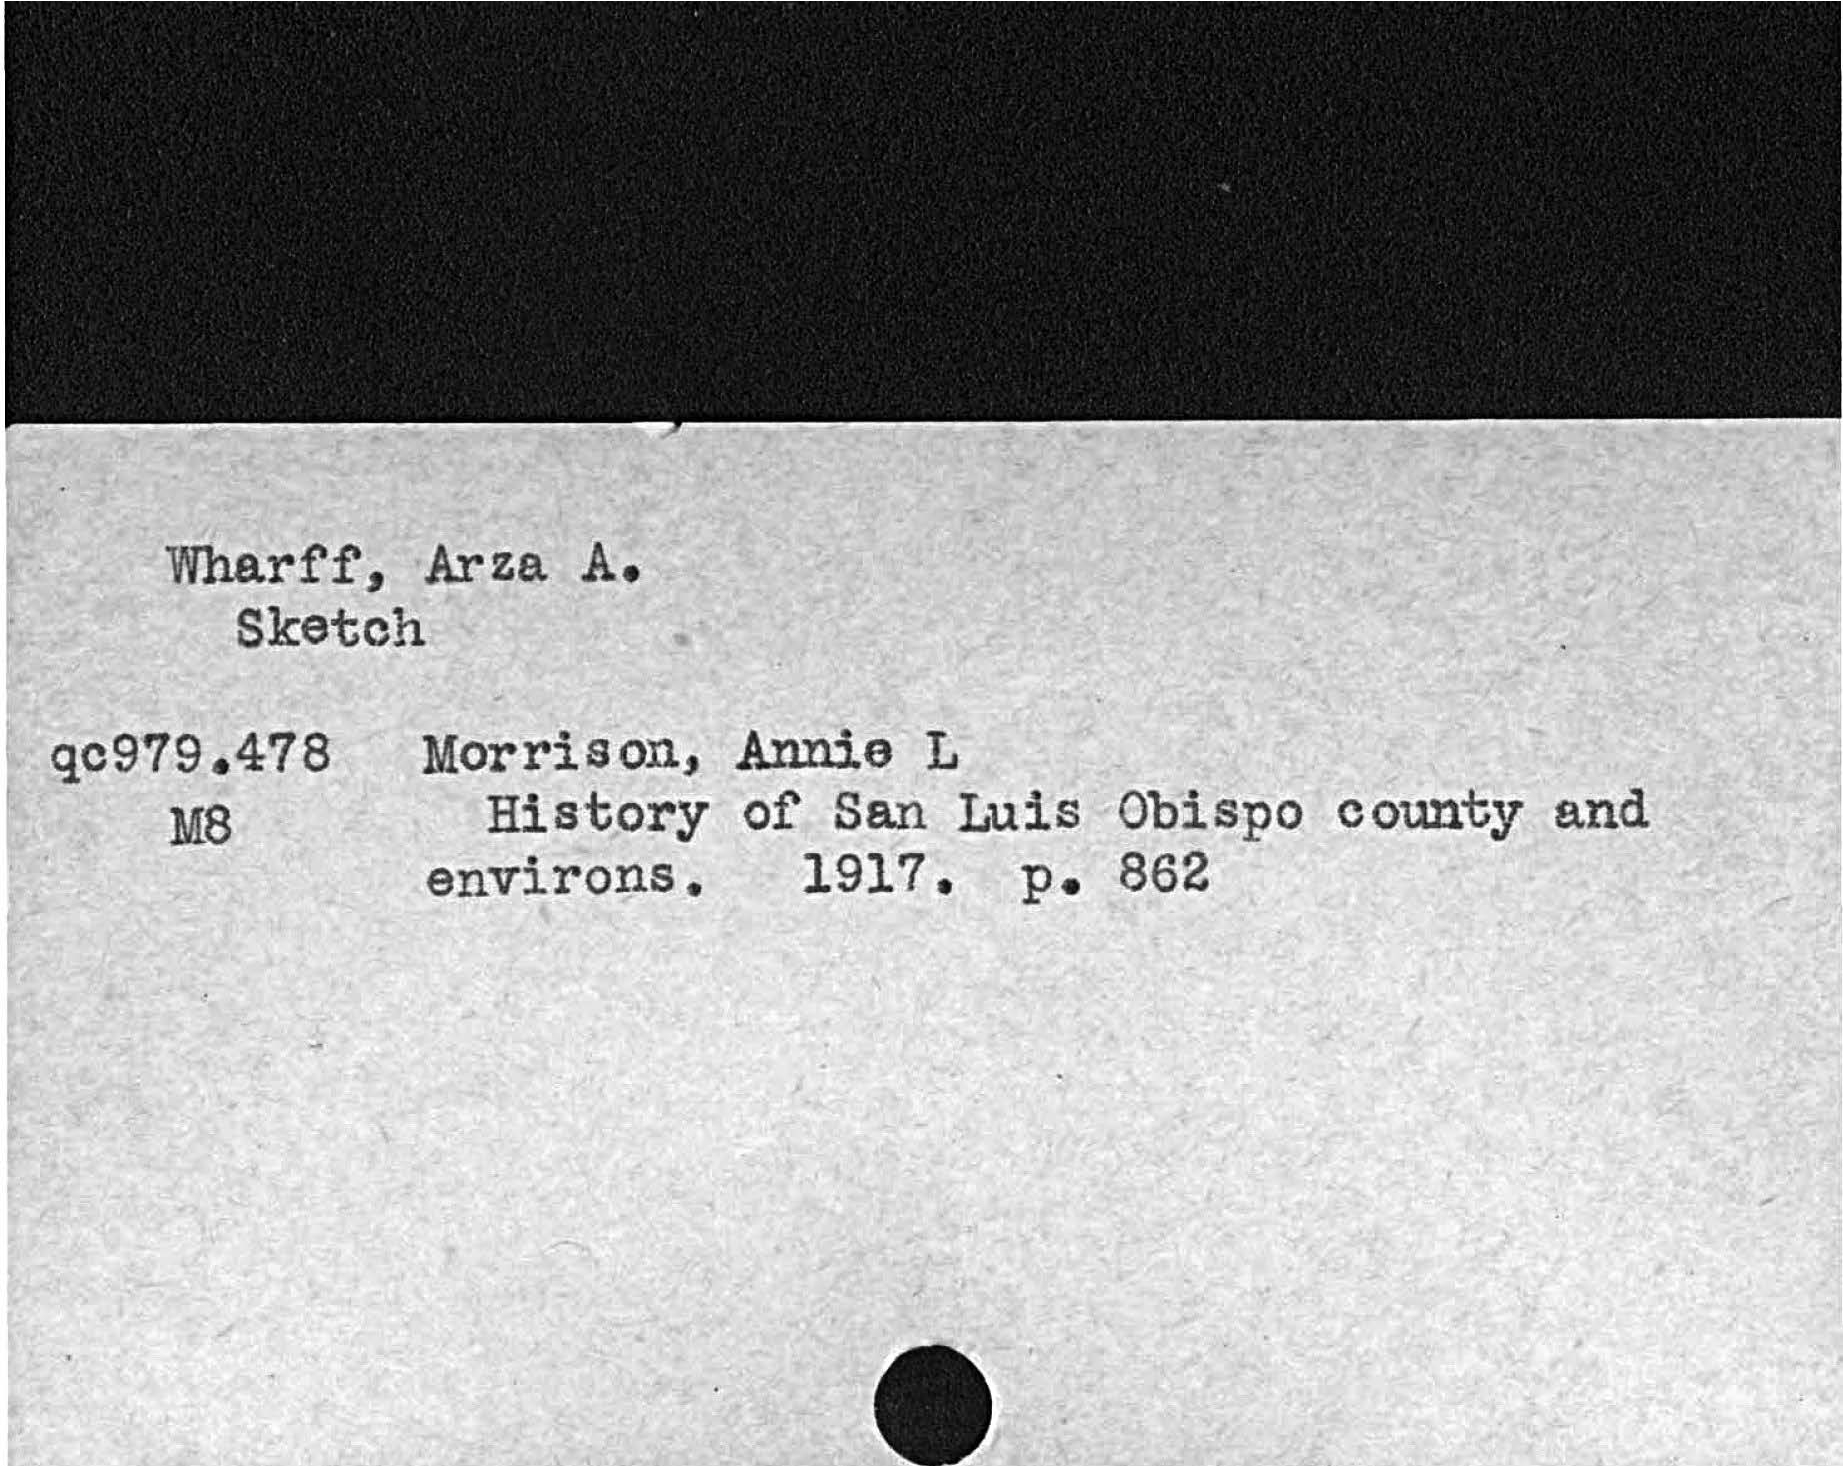 Wharff, Arza A.SketchMorrison, Annie LHistory of San Luis Obispo county andenvirons. 1917 p. 862   qc979. 478  M8